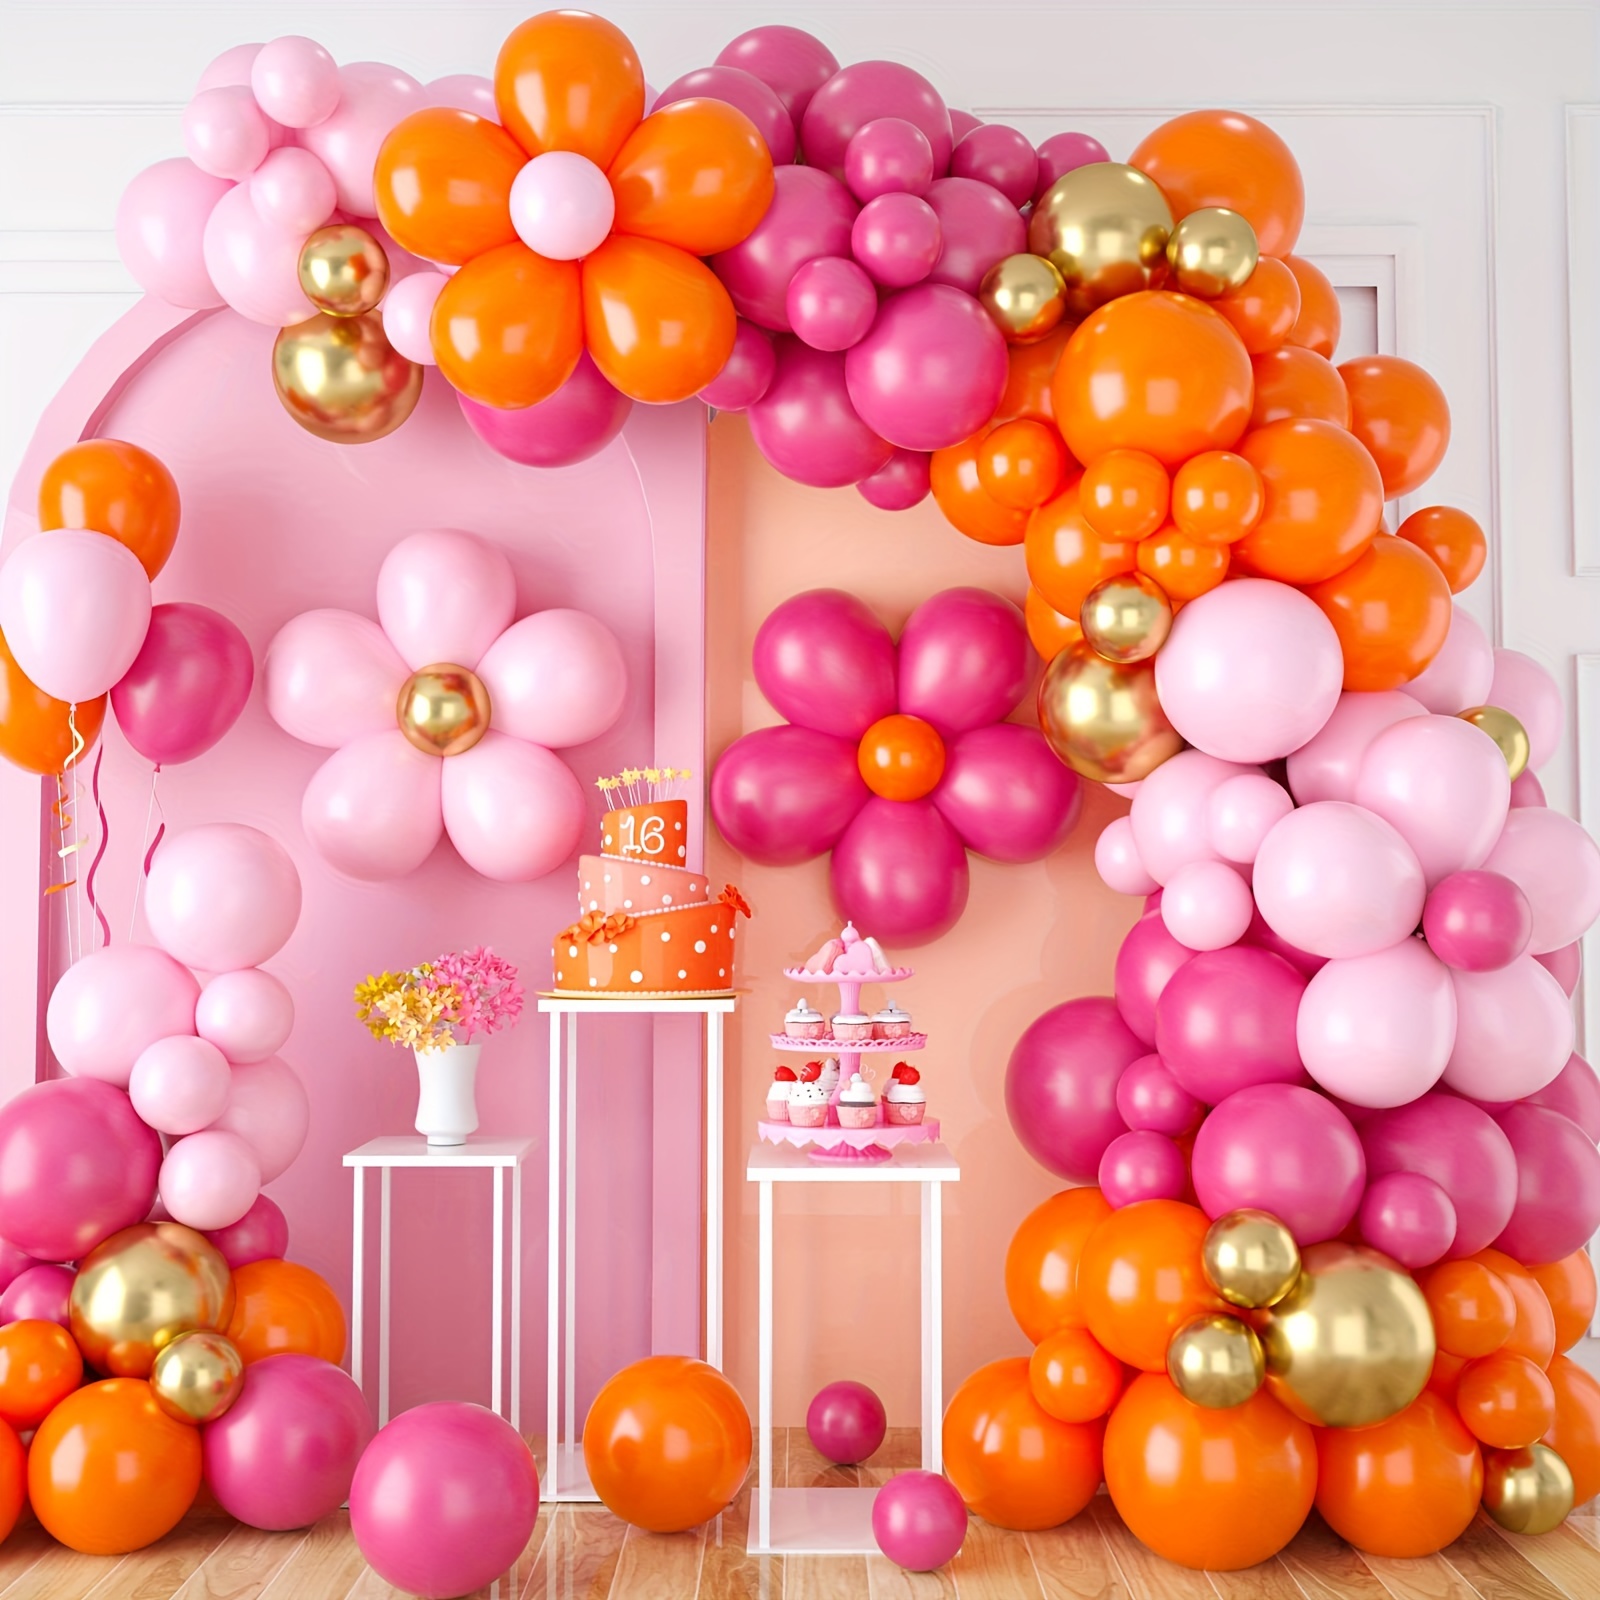 

110pcs, Pink And Orange Balloon Wreaths, Daisy Balloon Arch And Metal Golden Party Balloon Flowers Birthday Party Wedding Groovy Themed Decorations